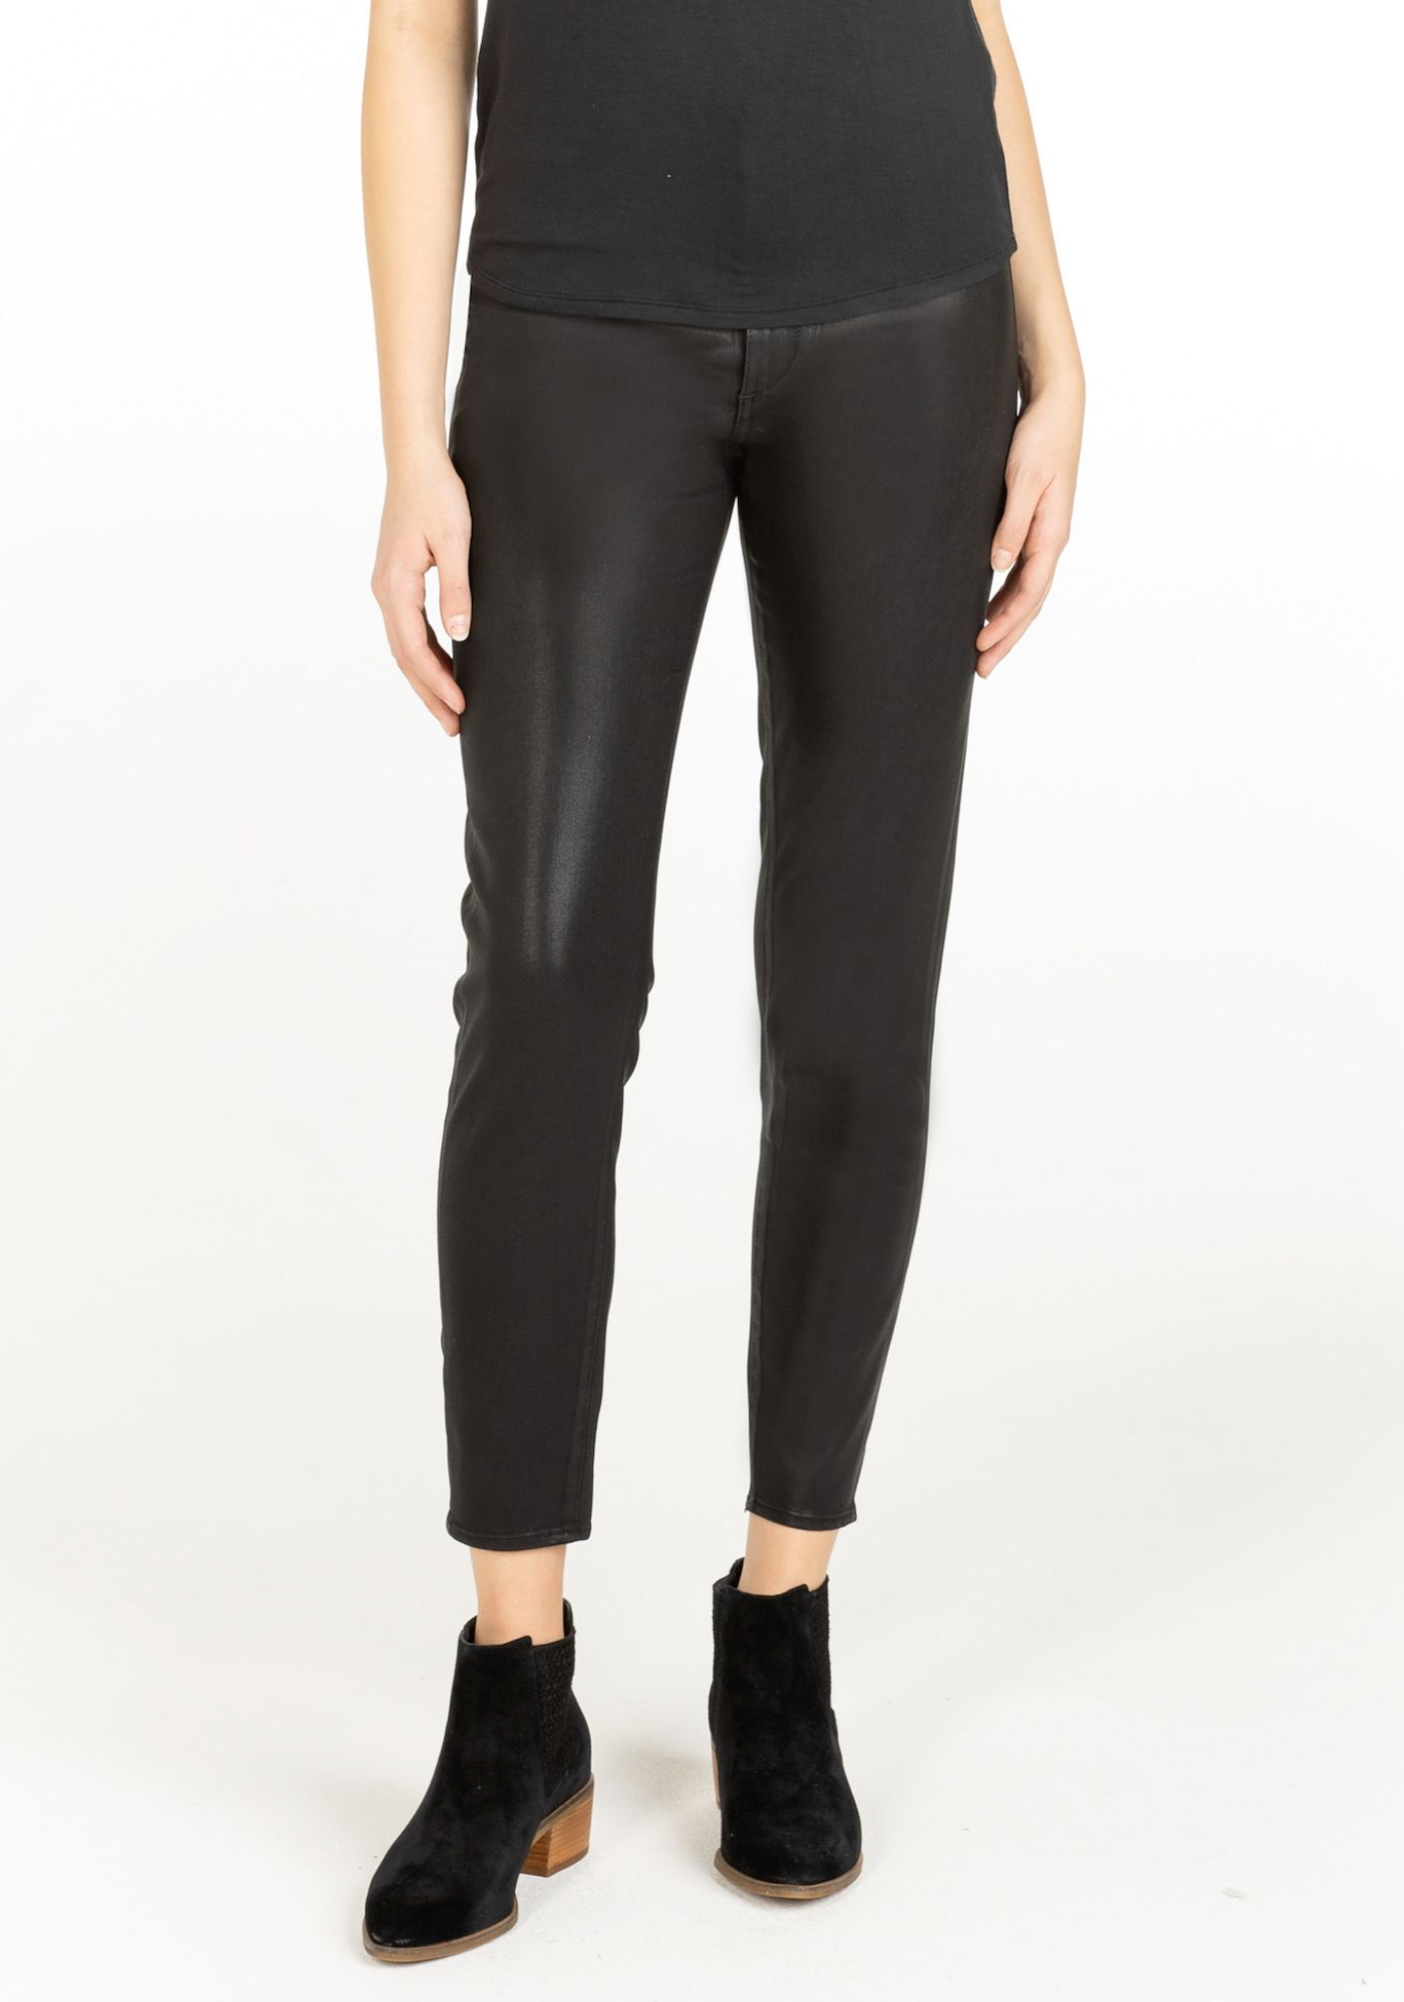 Articles Of Society Heather Coated Black Skinny